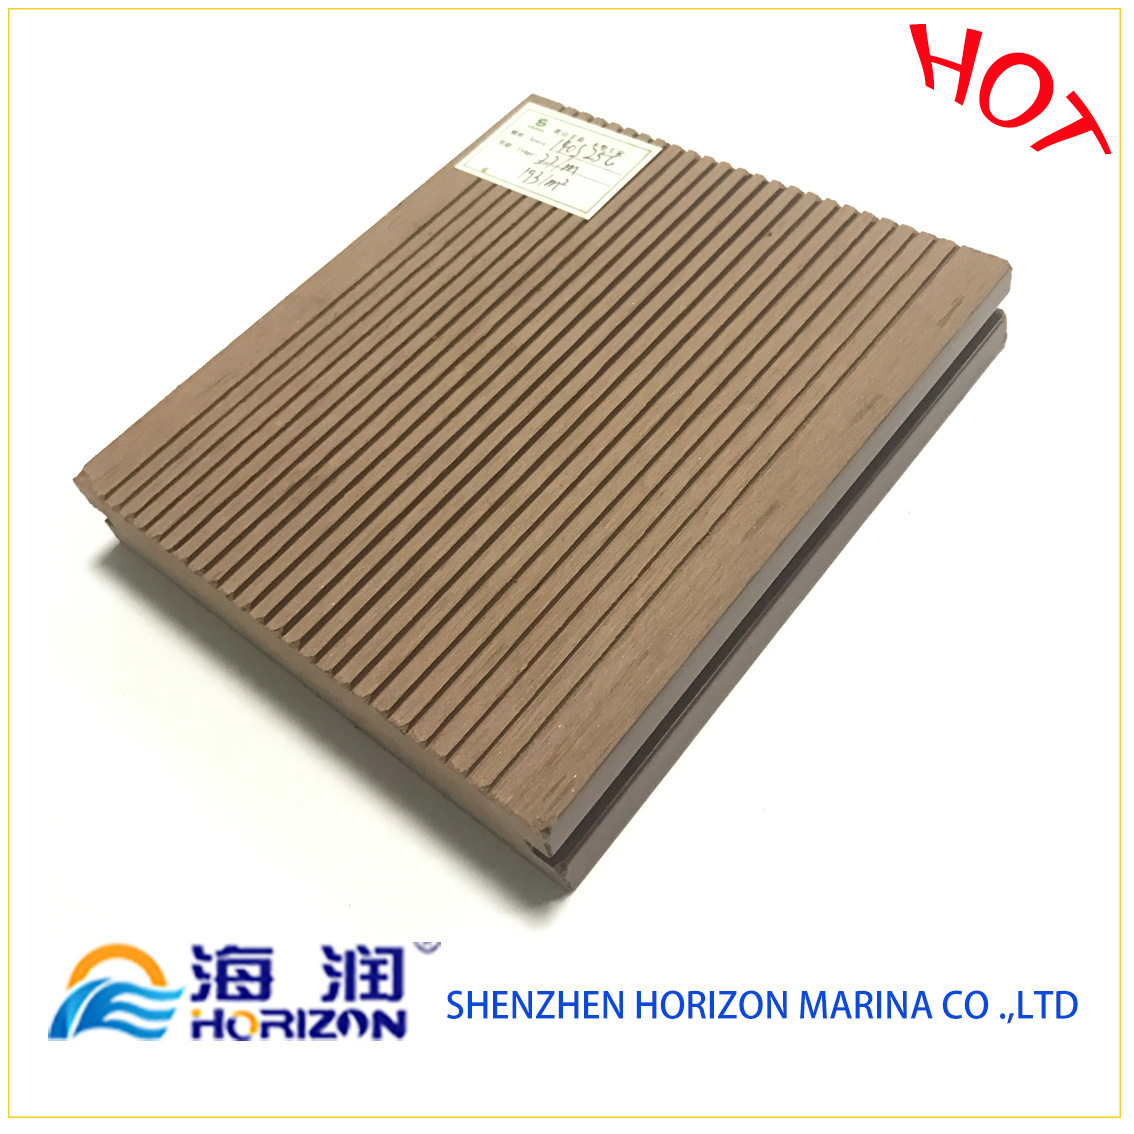 Hot Sale WPC Decking for Floating Dock Made in China/Wood Plastic Composite